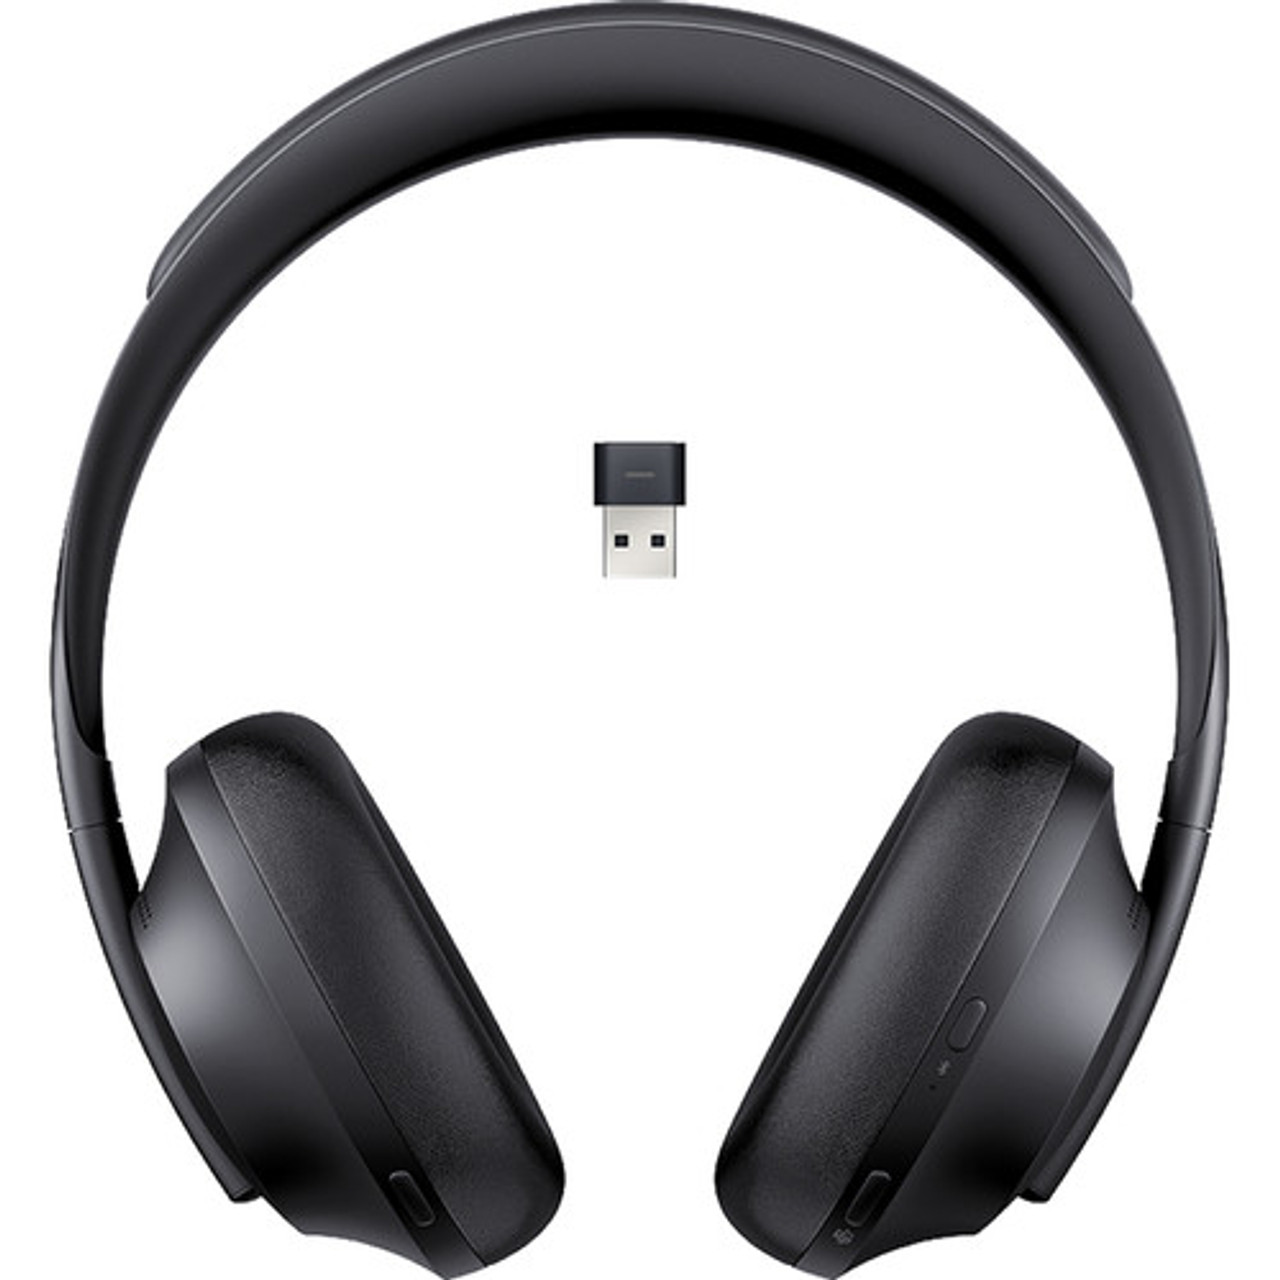 Bose Bluetooth Noise Cancelling 700 UC Headphones with USB Bluetooth Module (Black) - 852267-0100